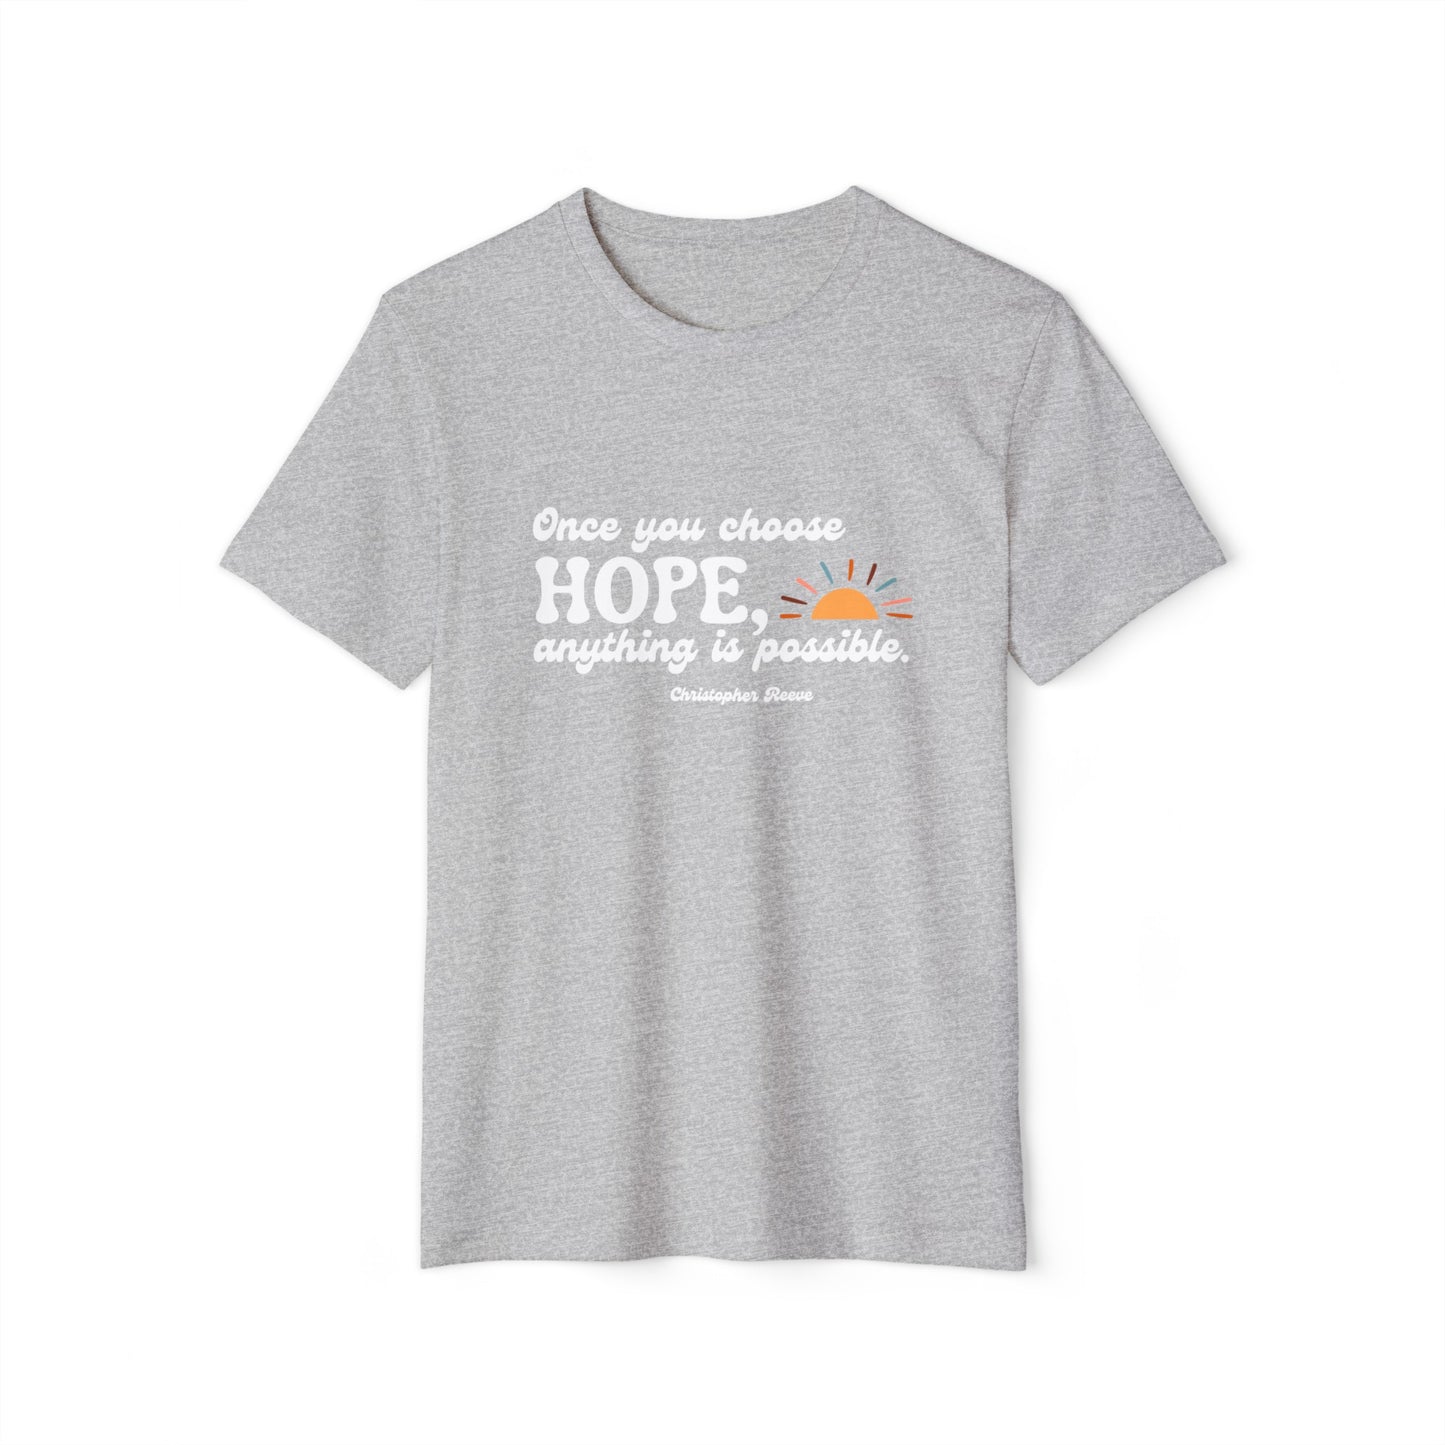 Christopher Reeve HOPE quote Unisex Recycled Organic T-Shirt